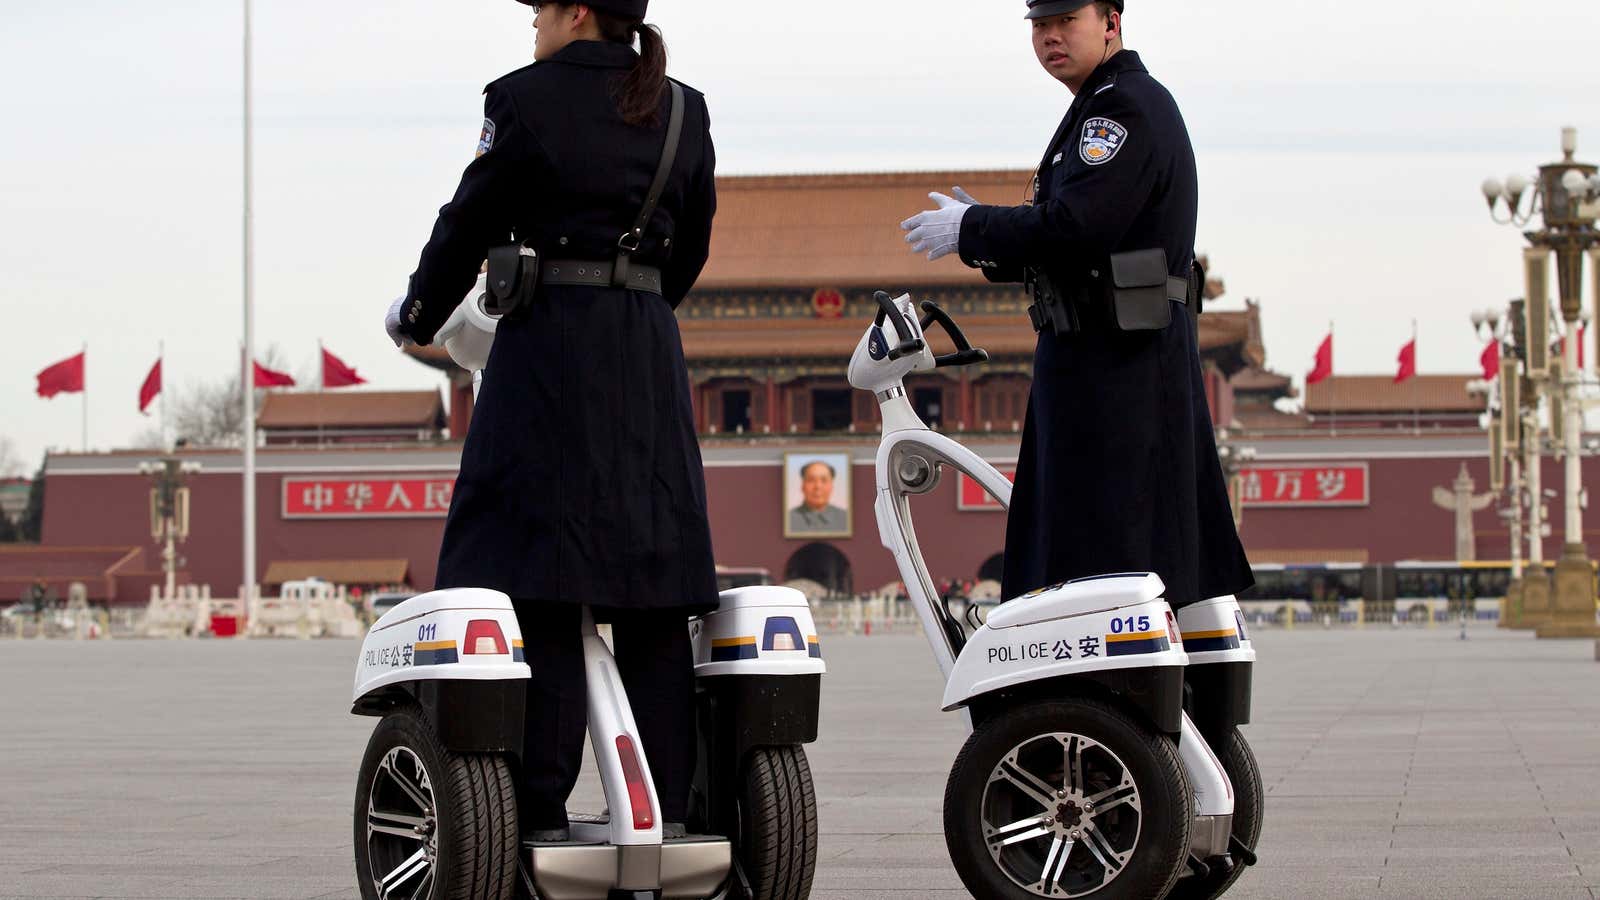 Police patrol Beijing’s Tiananmen Square, the venue where Sky News reporter Mark Stone was arrested last week.